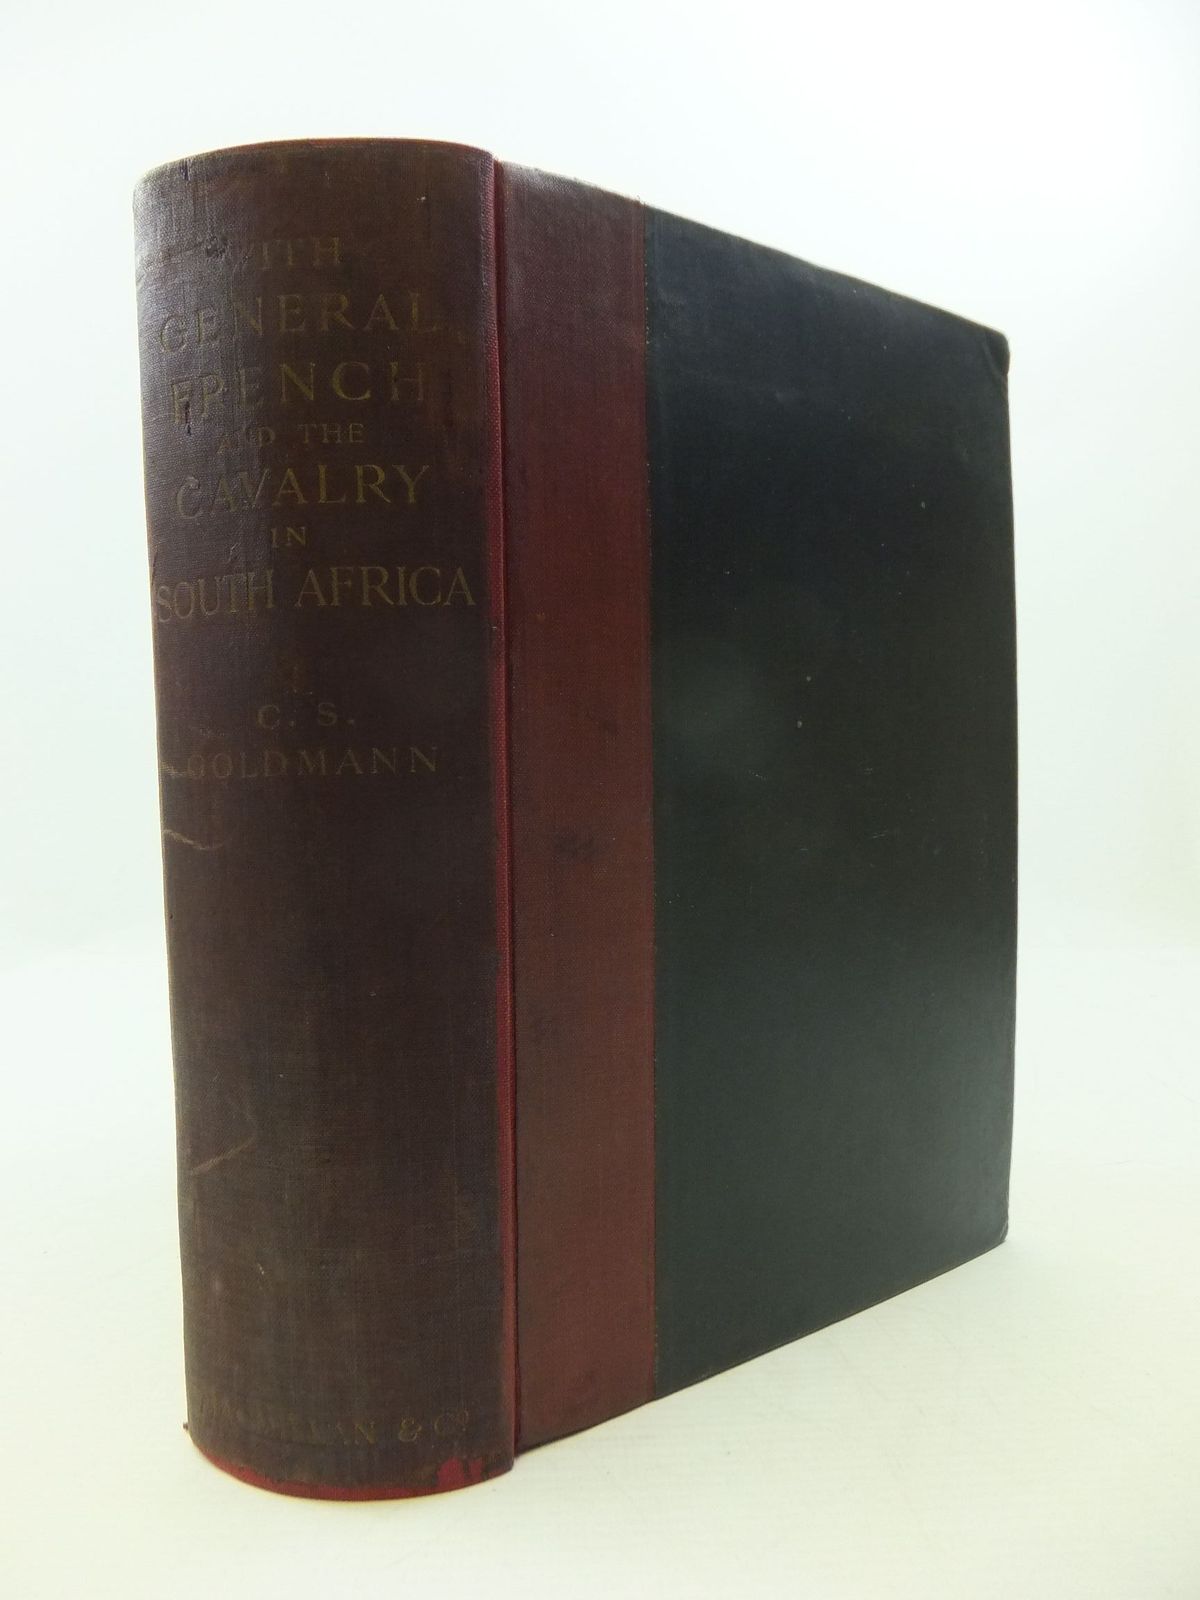 Photo of WITH GENERAL FRENCH AND THE CAVALRY IN SOUTH AFRICA written by Goldmann, Charles Sydney published by Macmillan &amp; Co. Ltd. (STOCK CODE: 2111576)  for sale by Stella & Rose's Books